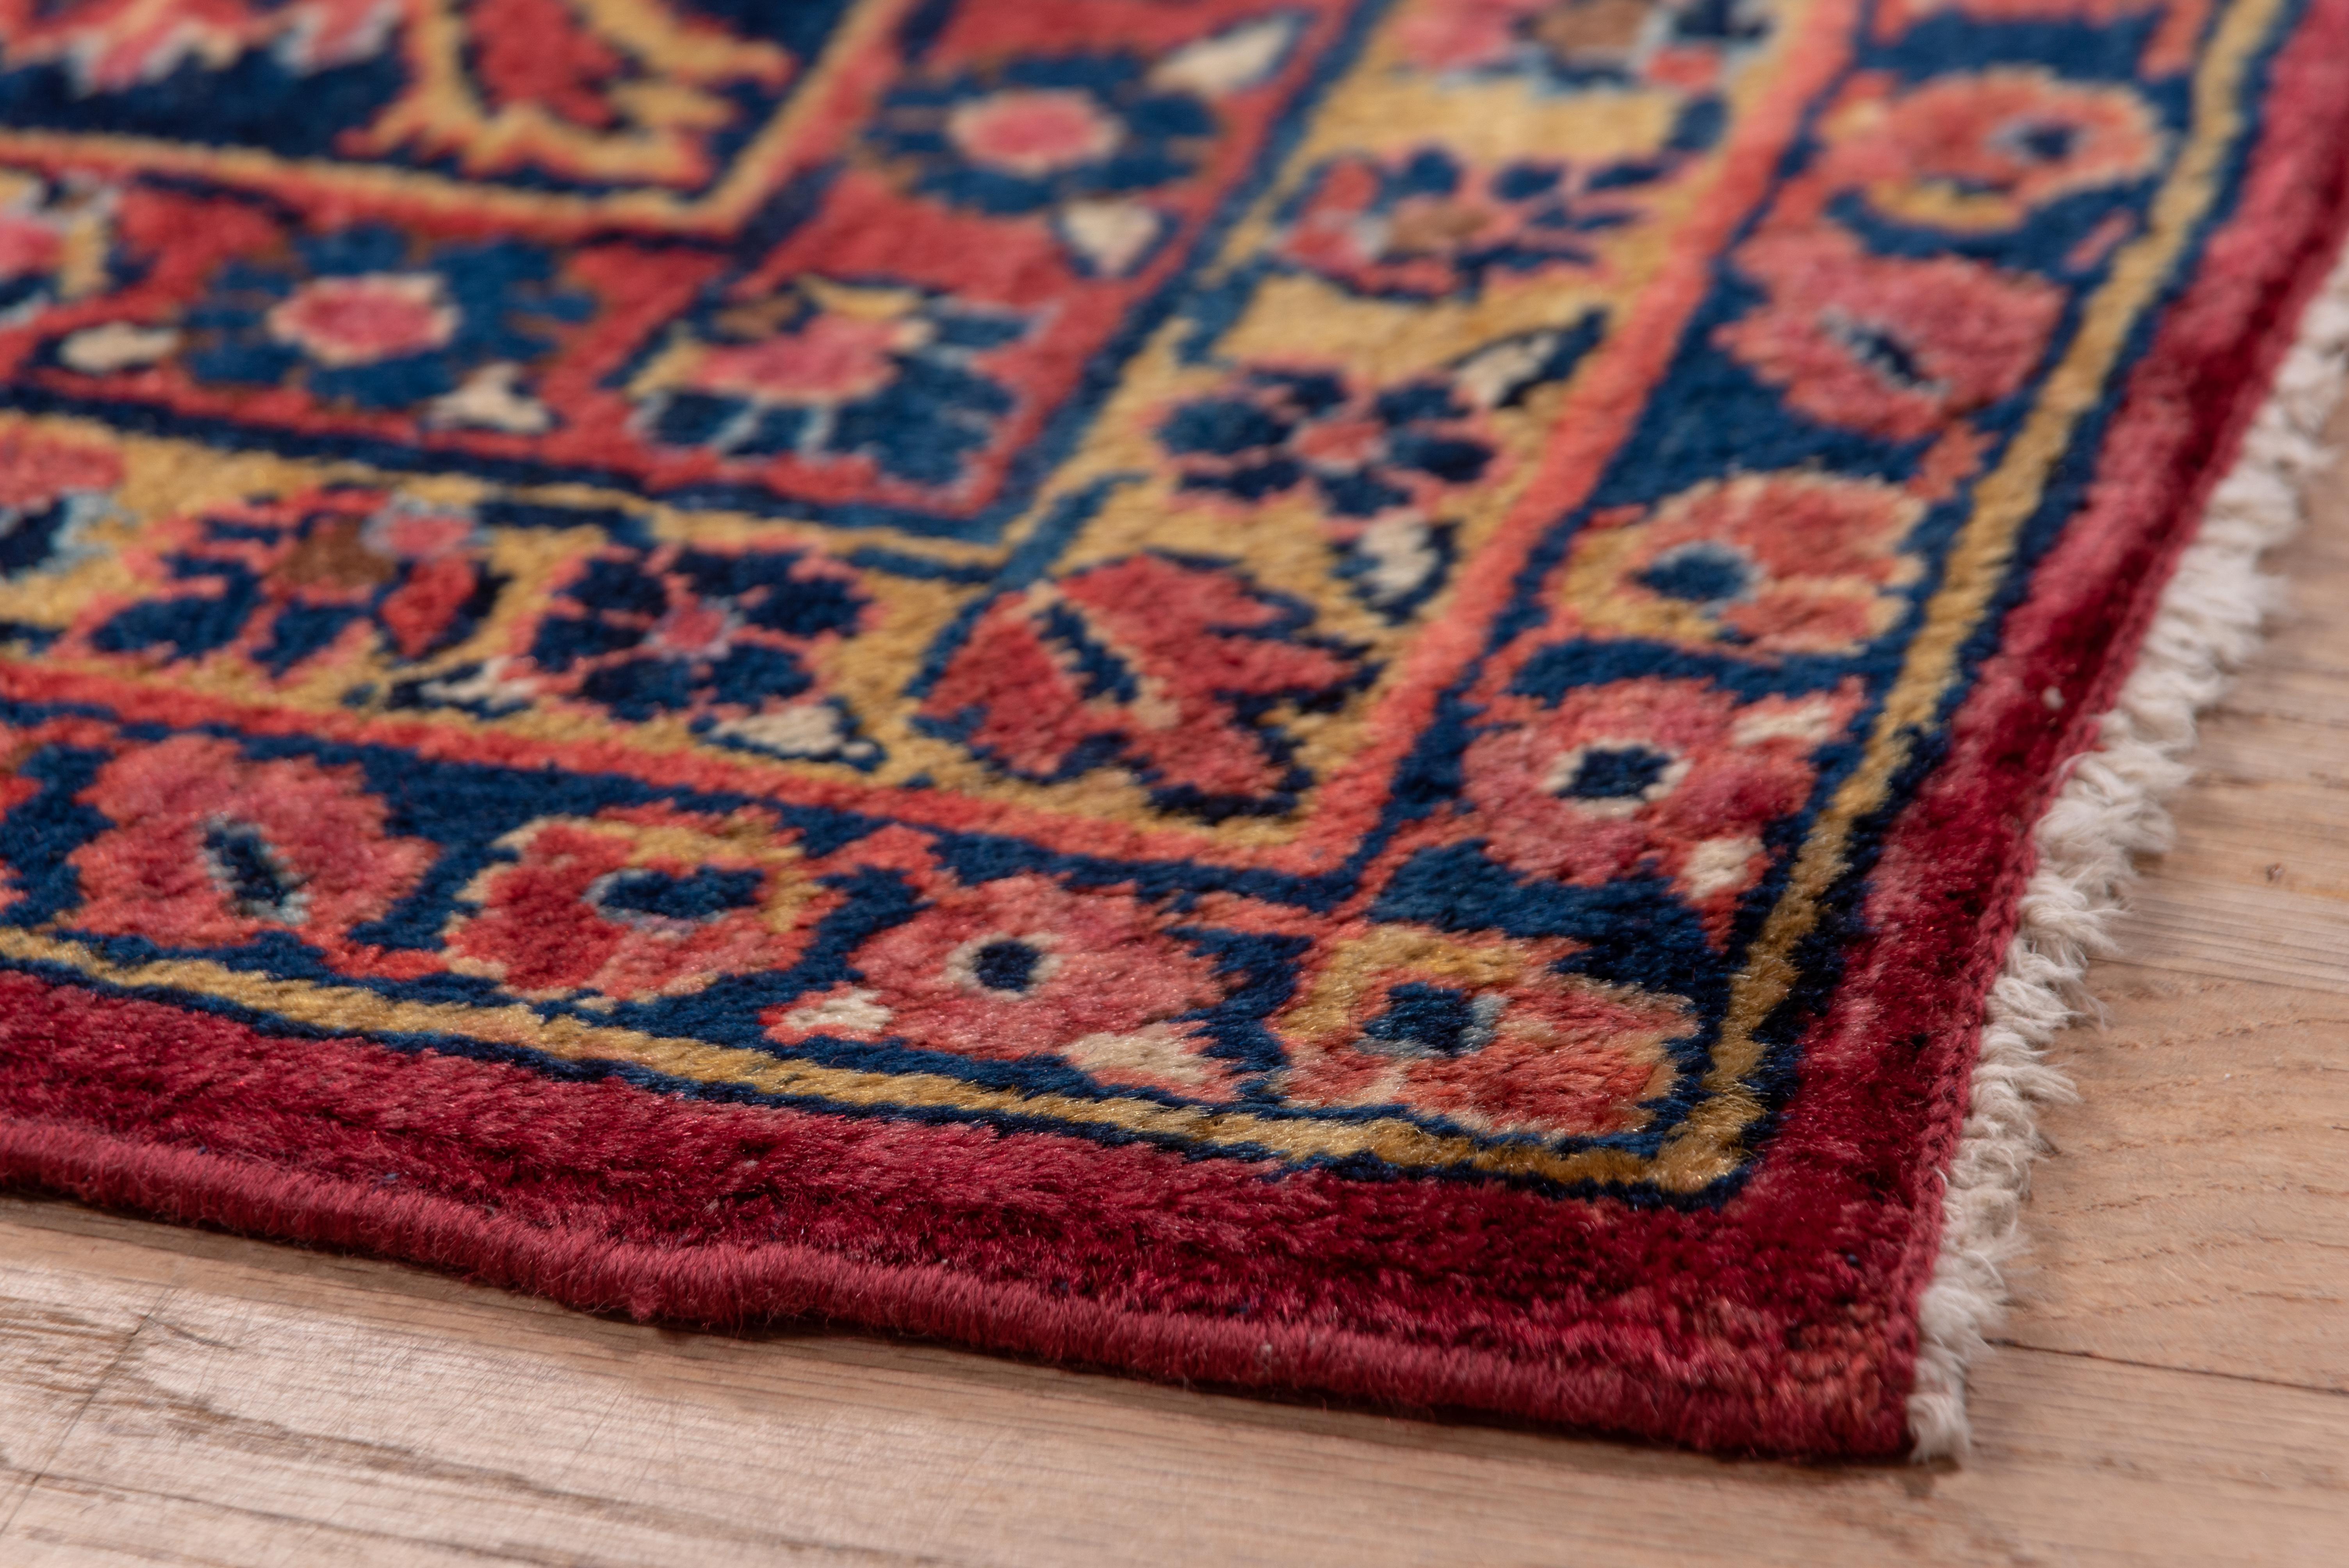 Hand-Knotted Antique Persian Sarouk Rug, Bright Red Field, Gold and Blue Accents, Medium Pile For Sale